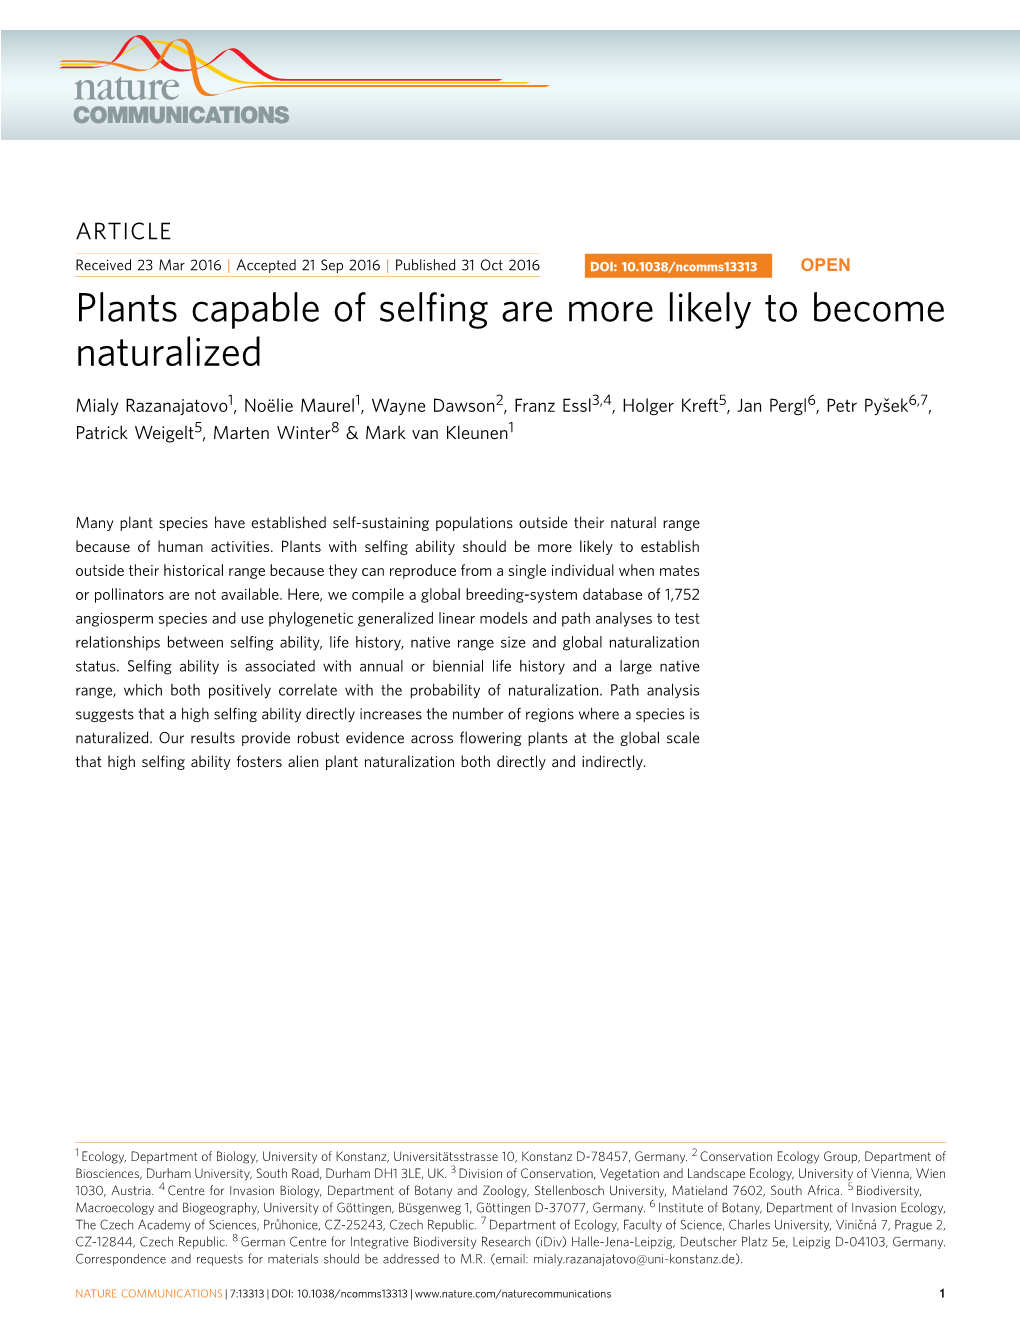 Plants Capable of Selfing Are More Likely to Become Naturalized